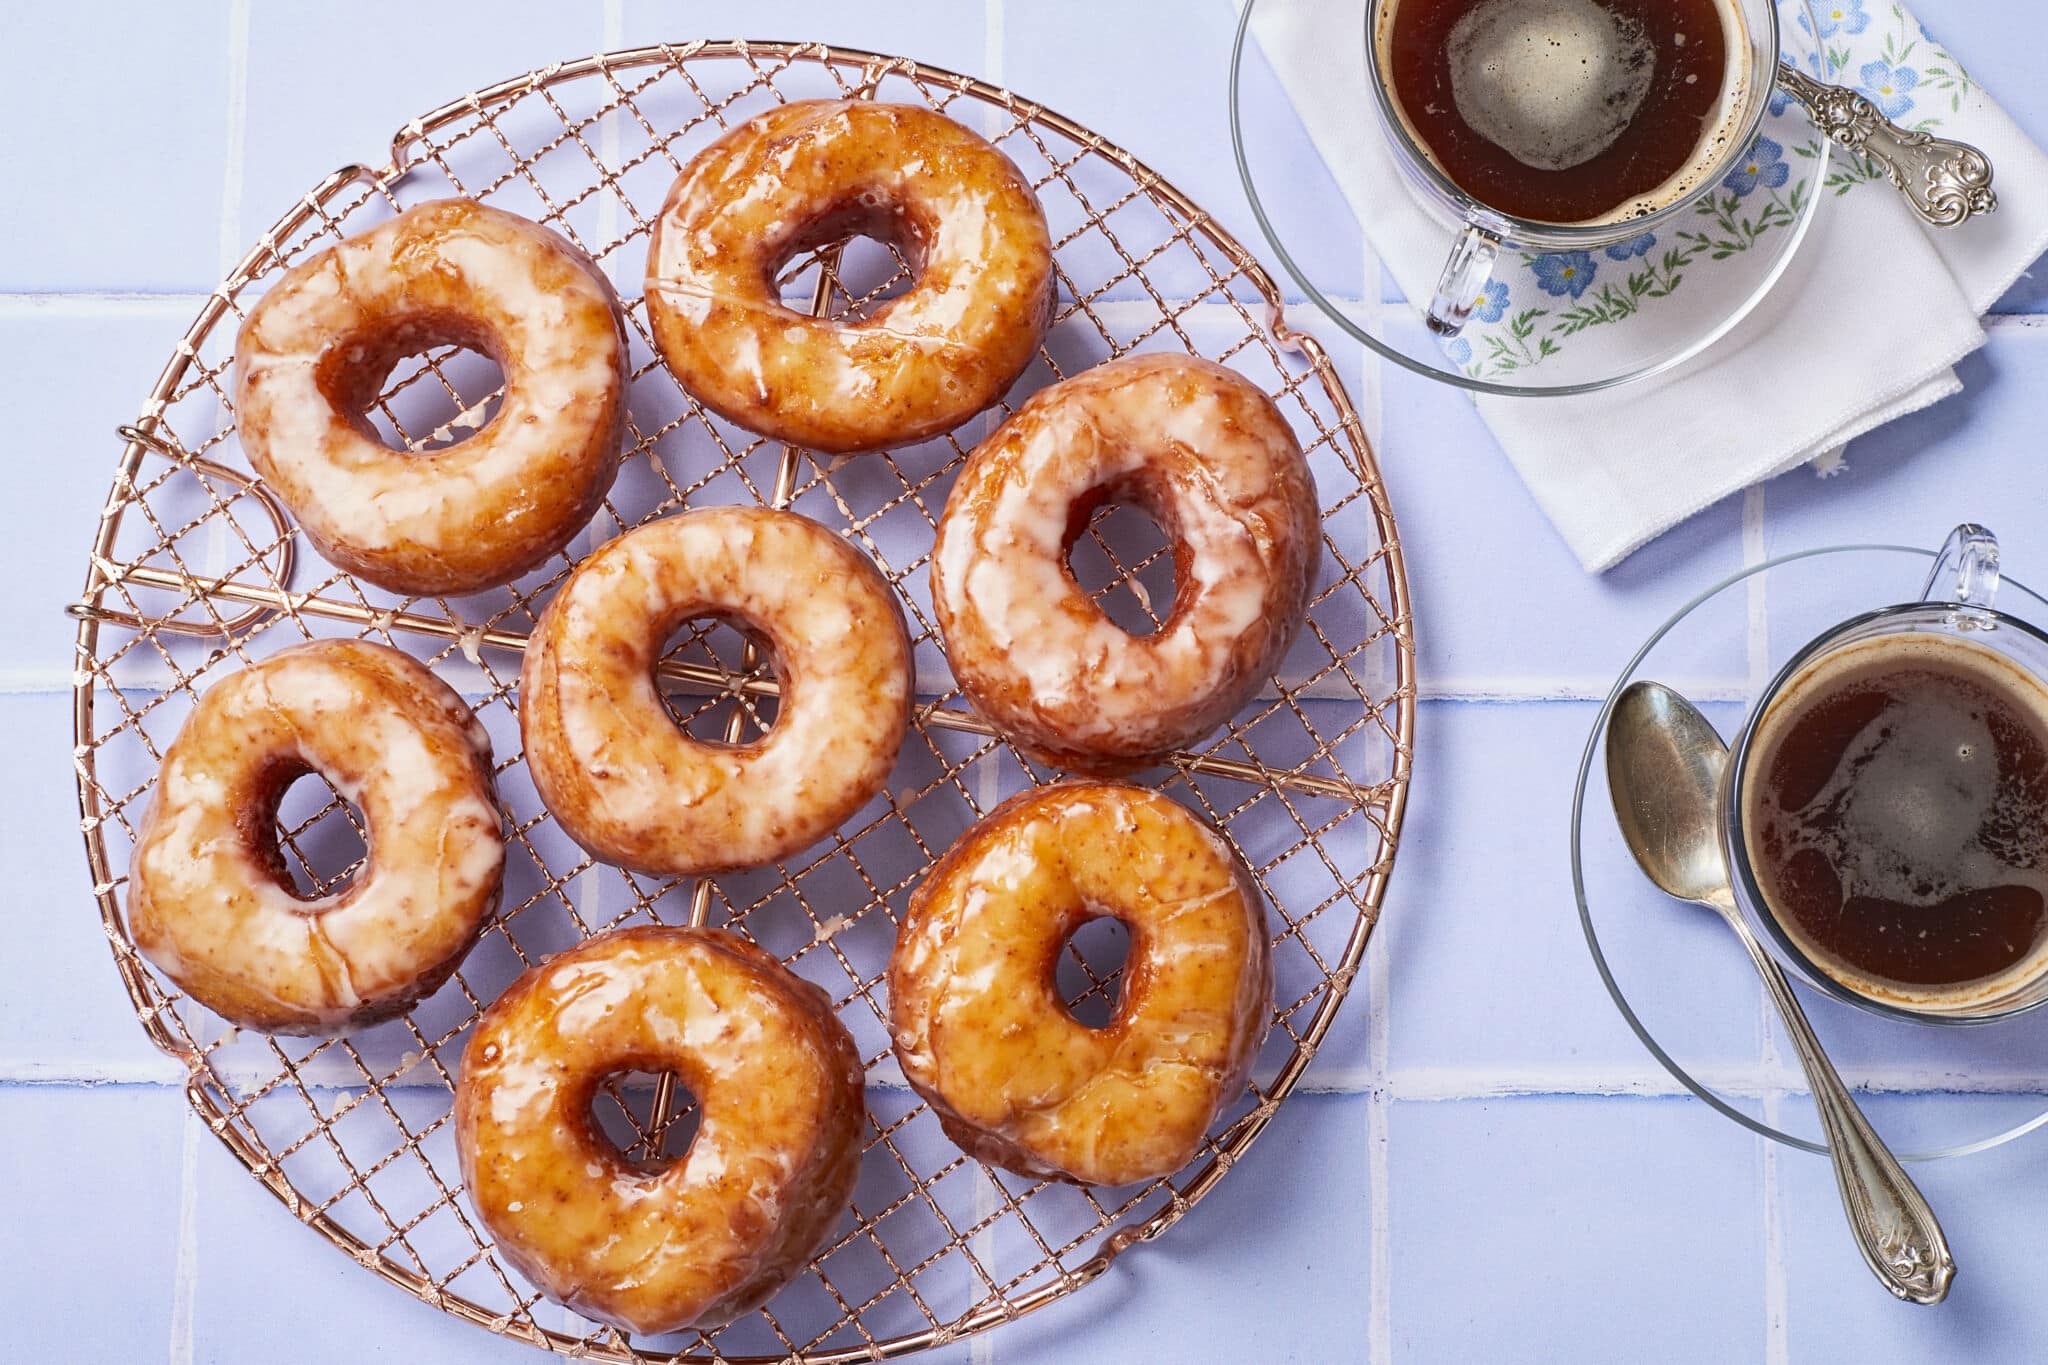 Homemade Krispy Kreme donuts are placed on a round rose-color wire cooling rack. These donuts are fried perfectly golden brown and soft, and topped with glossy clear icing. Two cups of tea is served on the side.